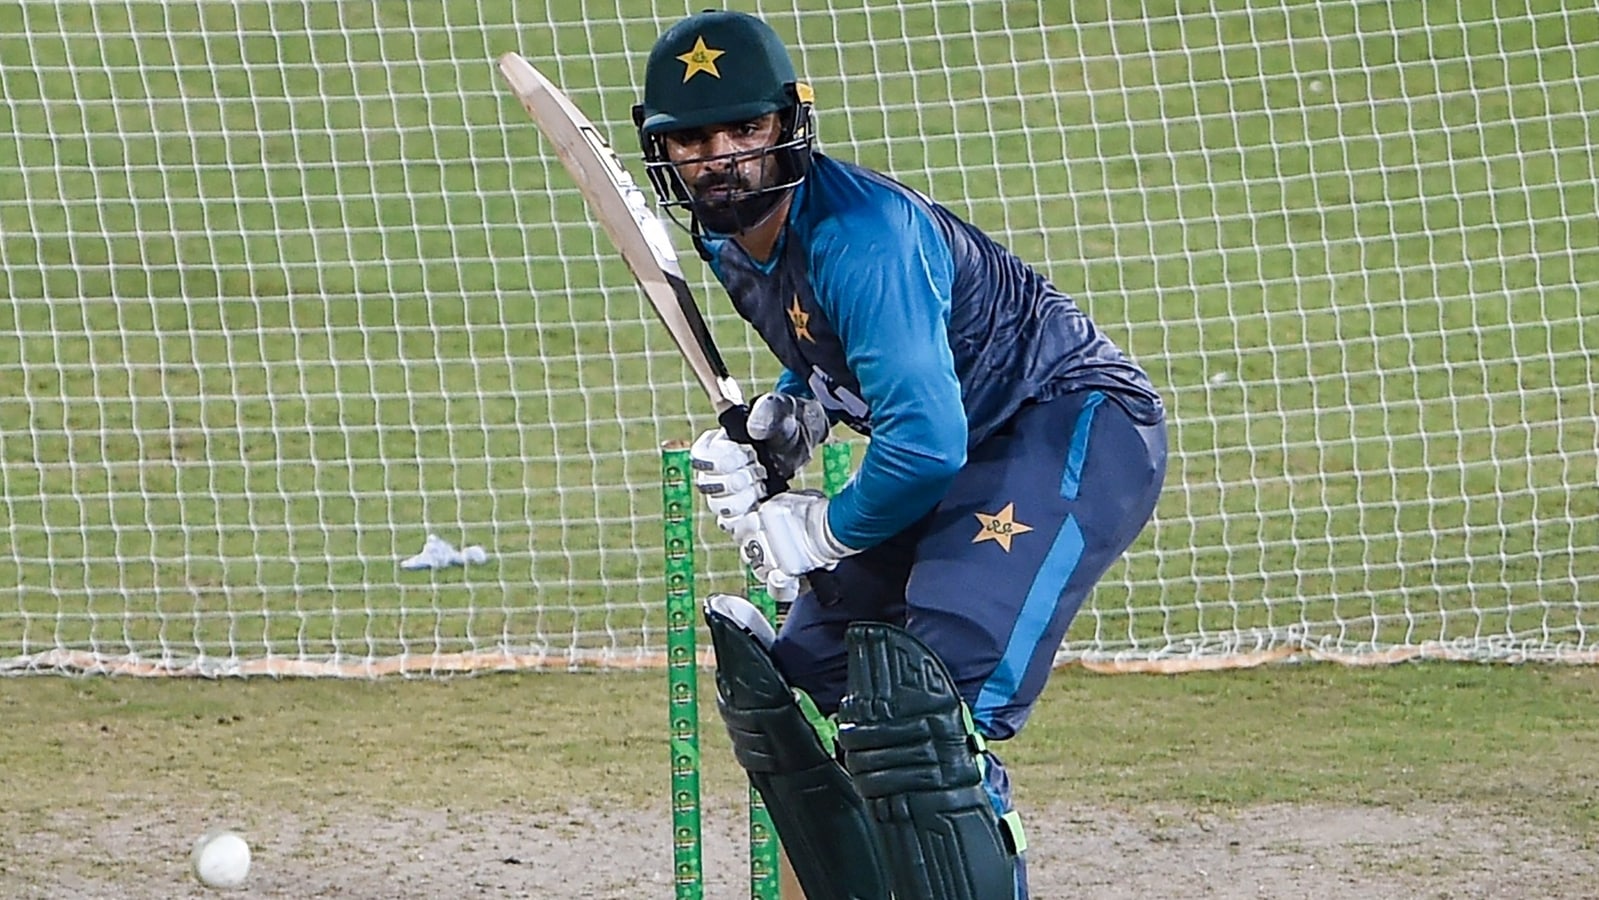 with-his-current-form-he-can-win-us-only-5-games-out-of-100-ex-pakistan-opener-on-x-factor-asif-ali-s-consistency